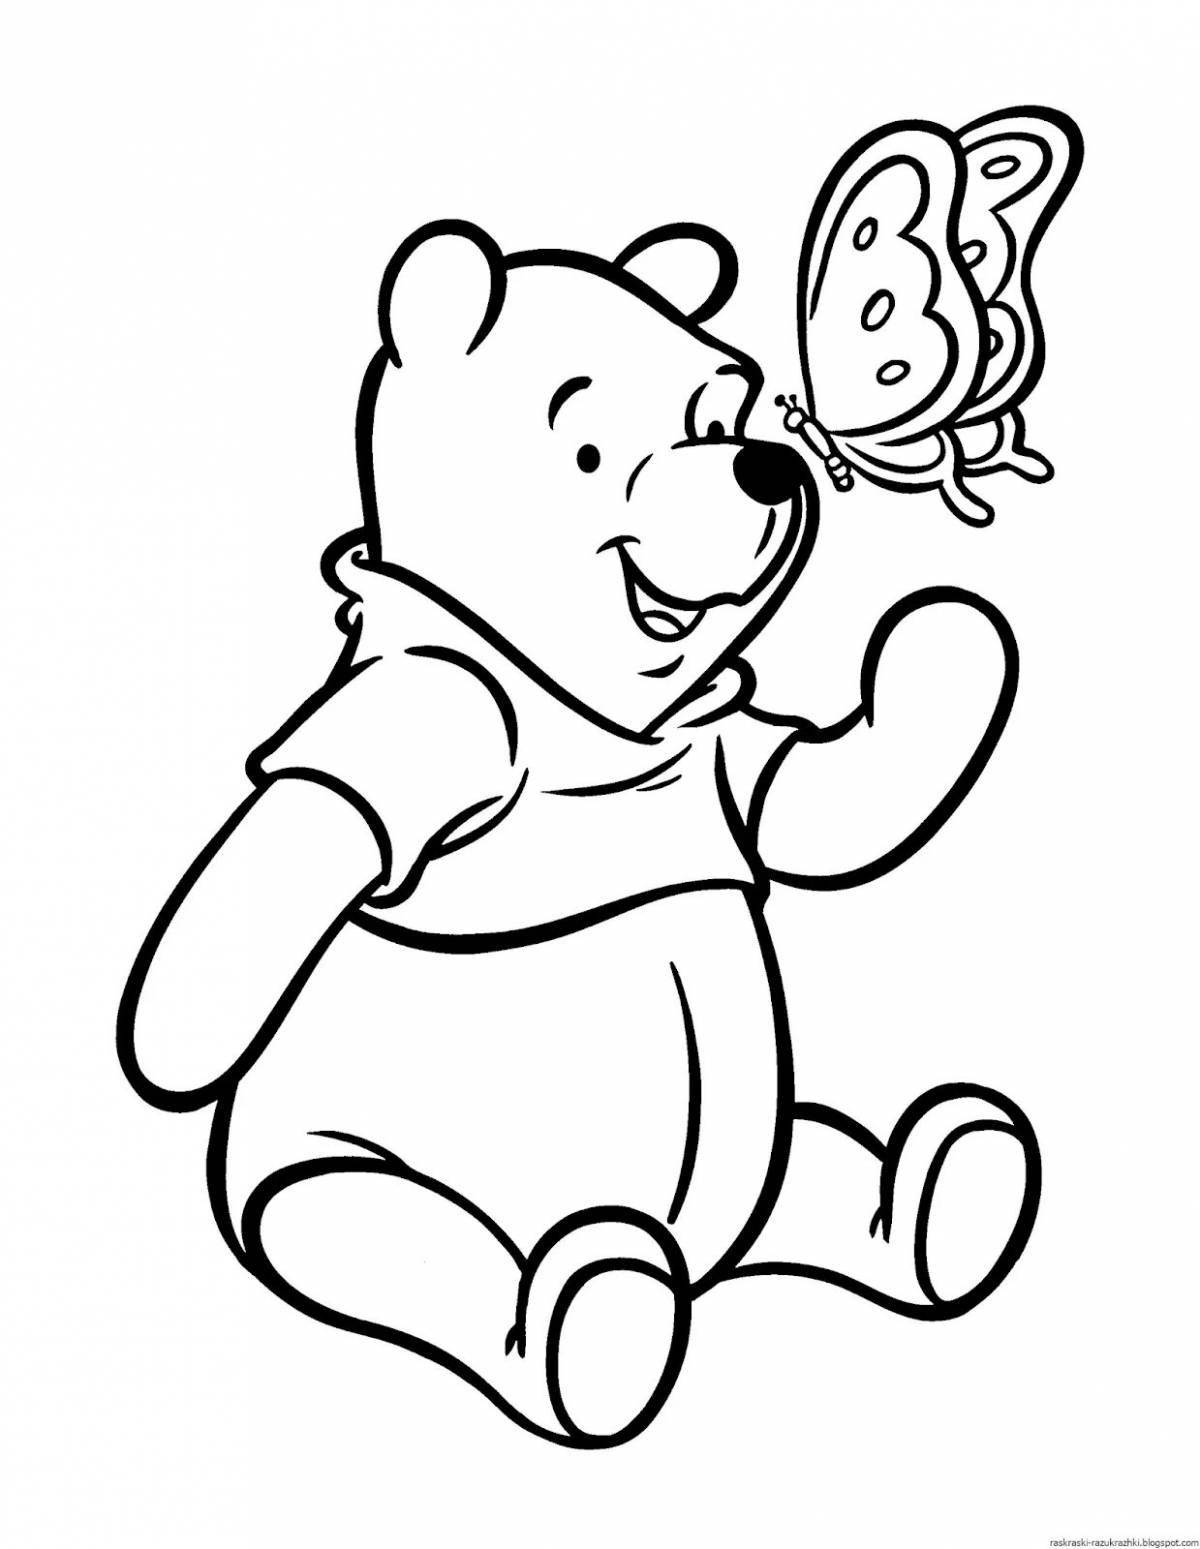 Adorable teddy bear coloring book for children 2-3 years old